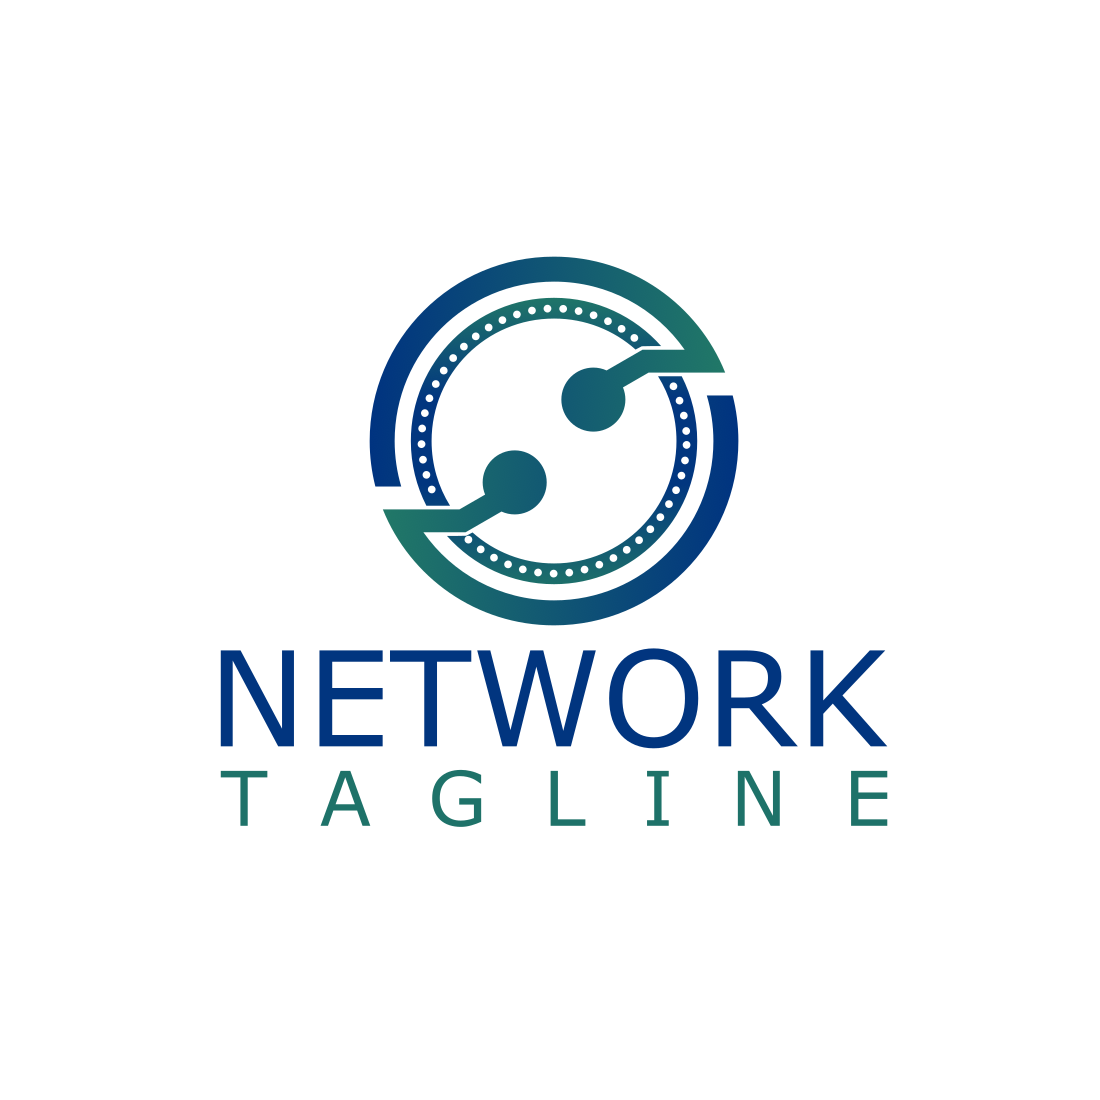 Cool Network Sign Logo Design Template cover image.